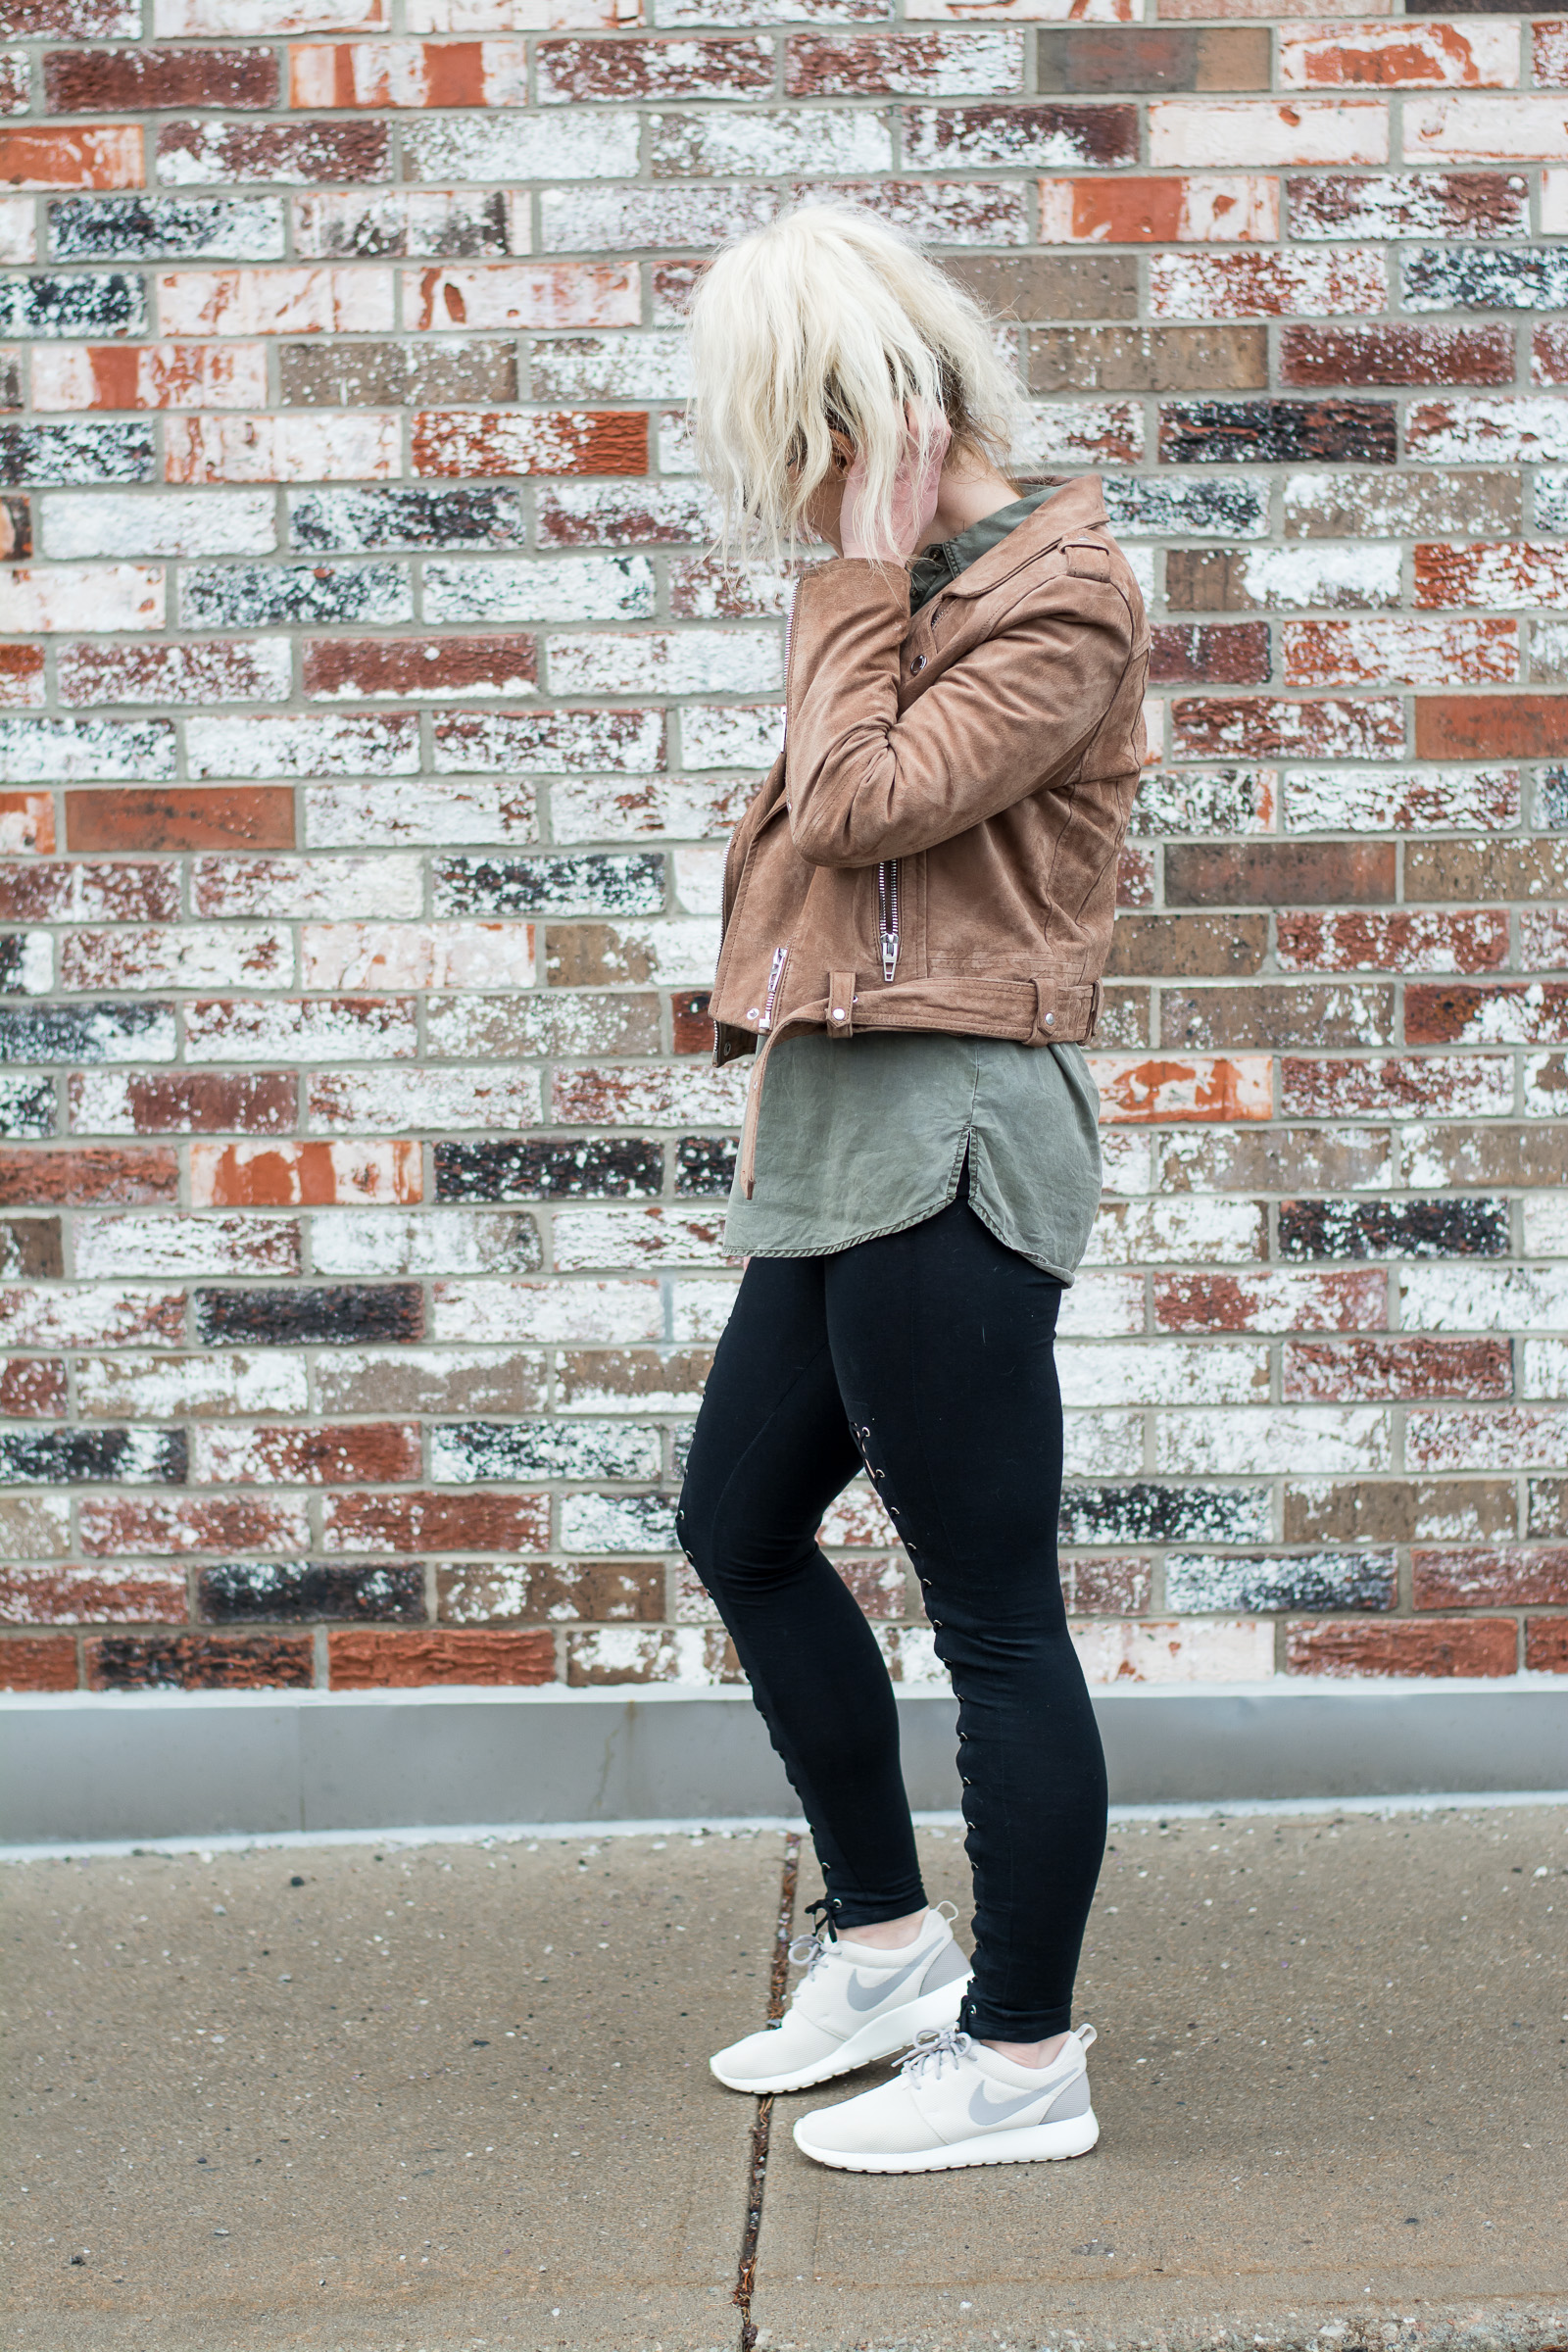 Fave Suede Jacket with Lace-up Leggings. | Ashley from LSR